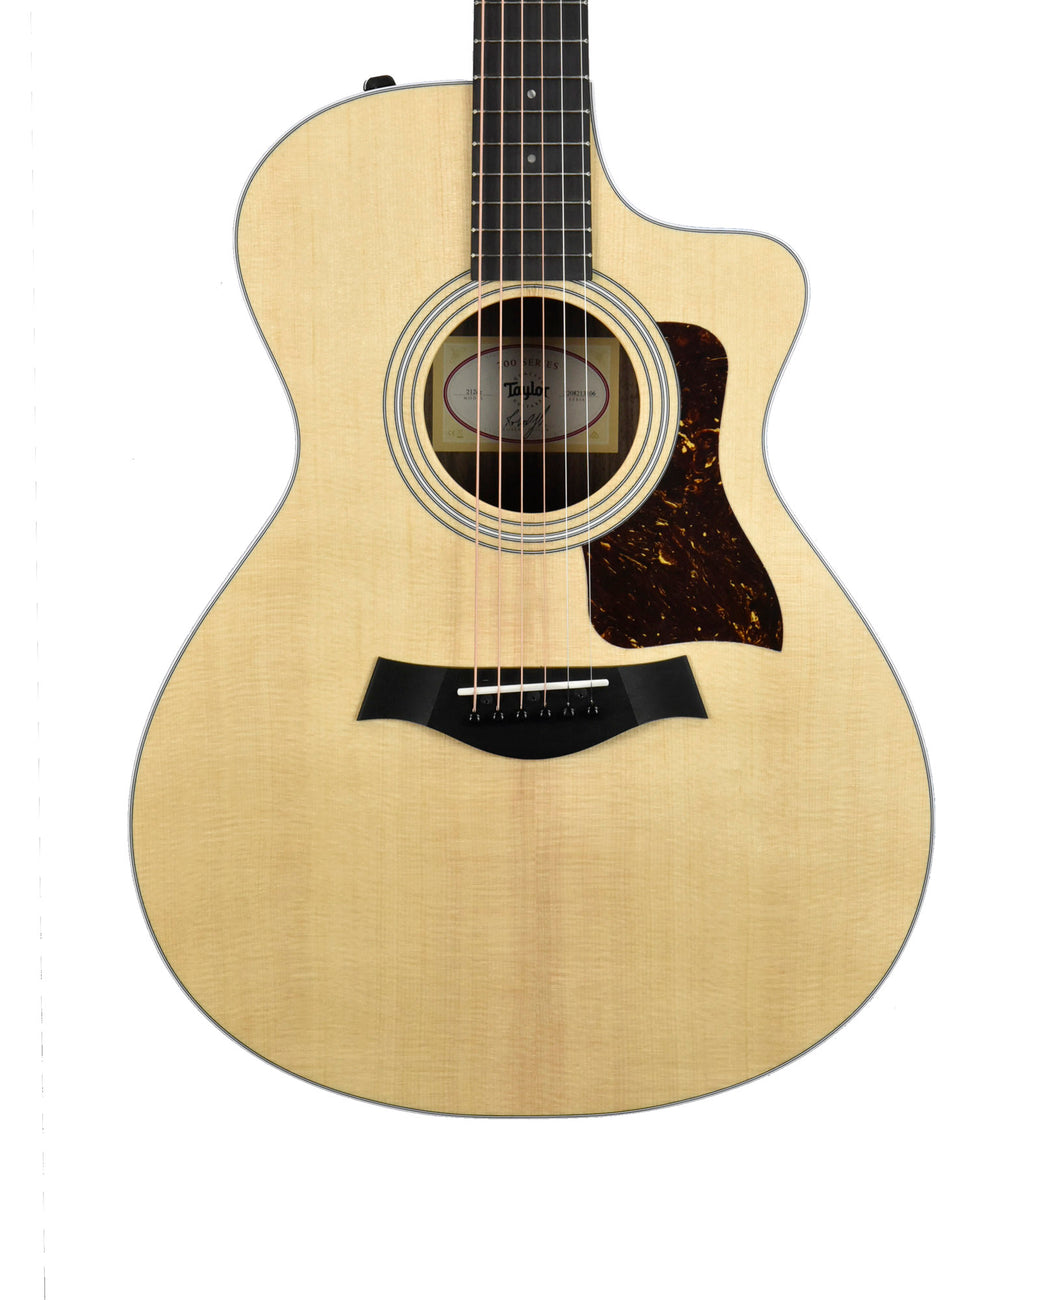 Taylor 212ce Acoustic-Electric Guitar in Natural 2208213106 - The Music Gallery